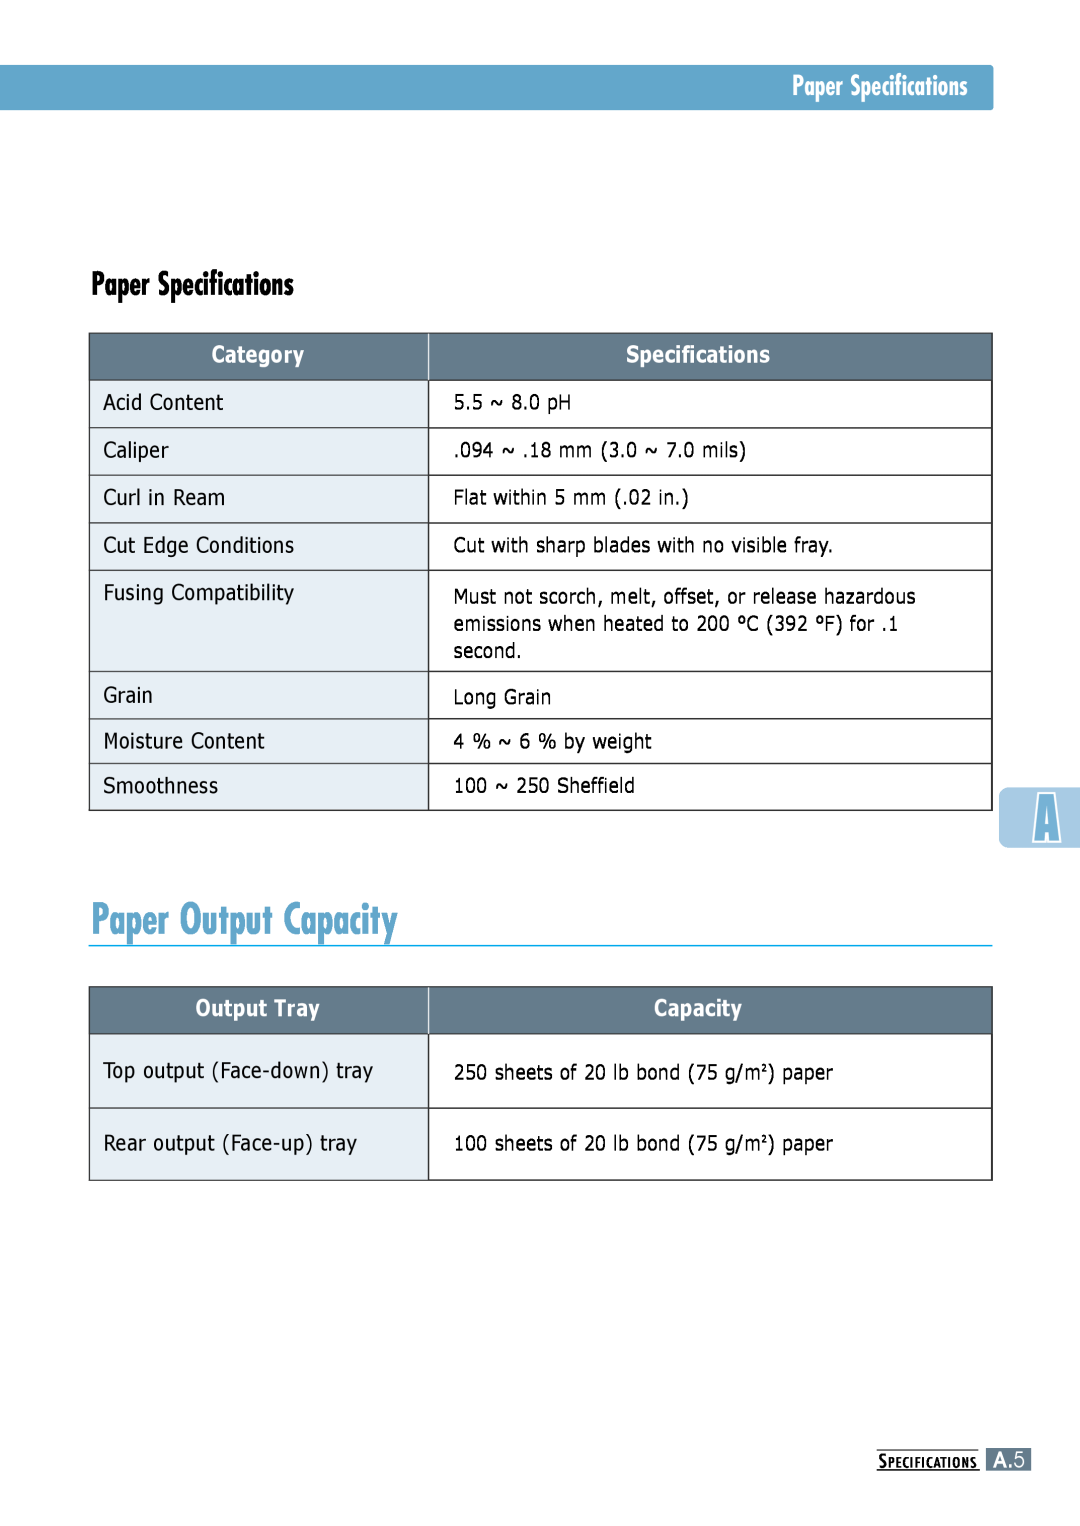 Samsung ML-6060S, ML-6060N manual Paper Output Capacity, Paper Specifications, Category, Output Tray 